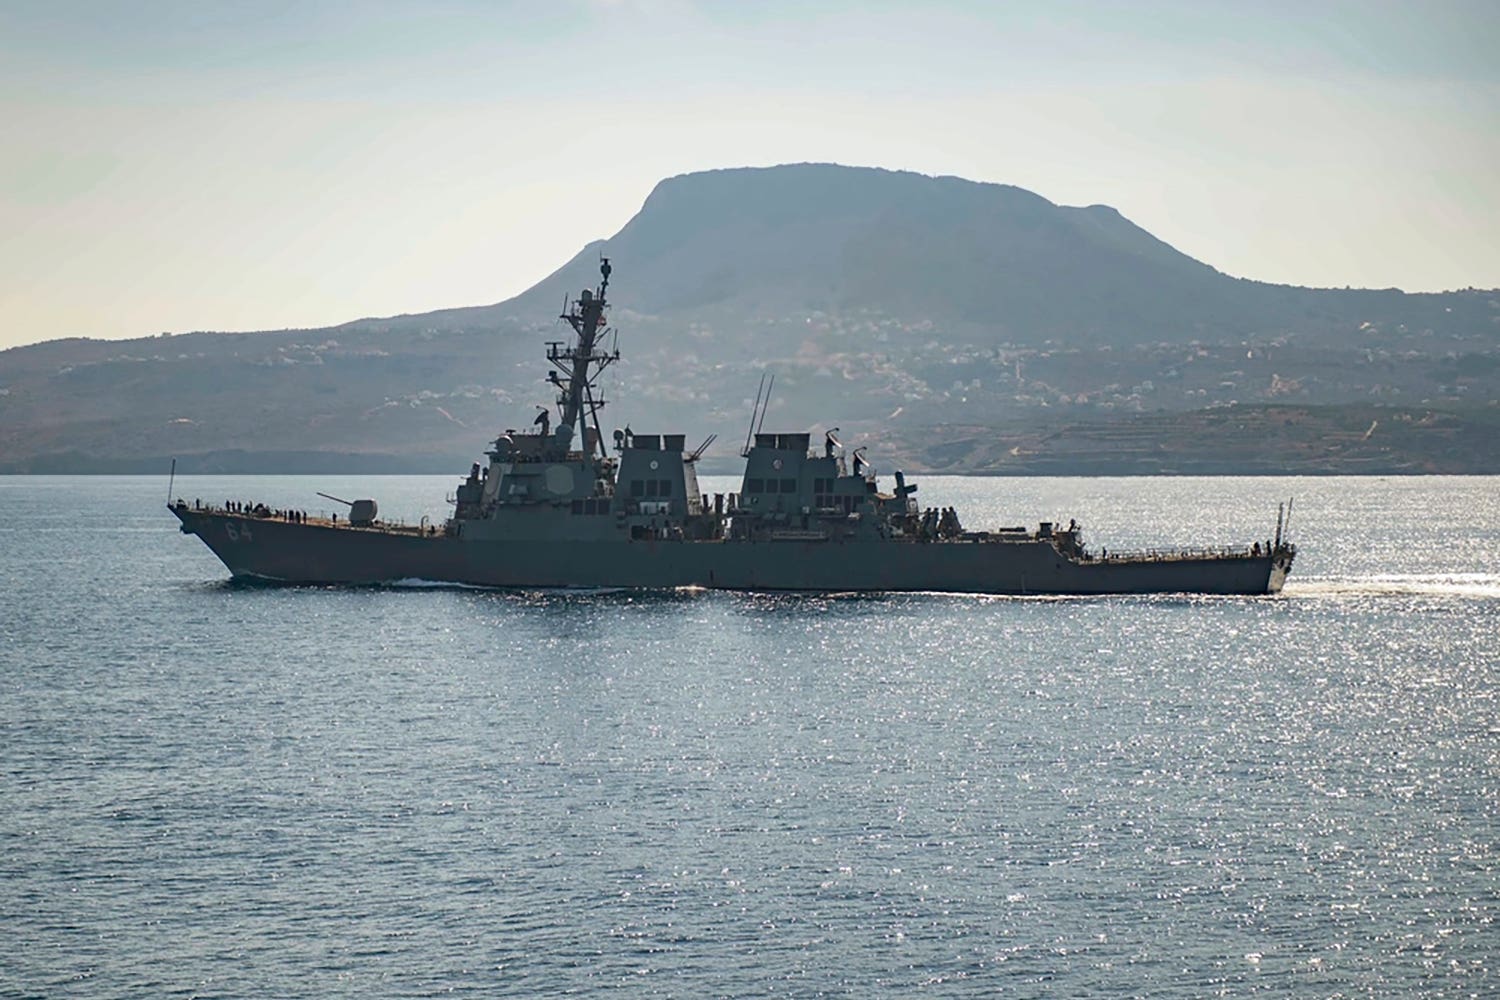 The guided-missile destroyer USS Carney intervened to protect commercial ships under attack by Houthi drones